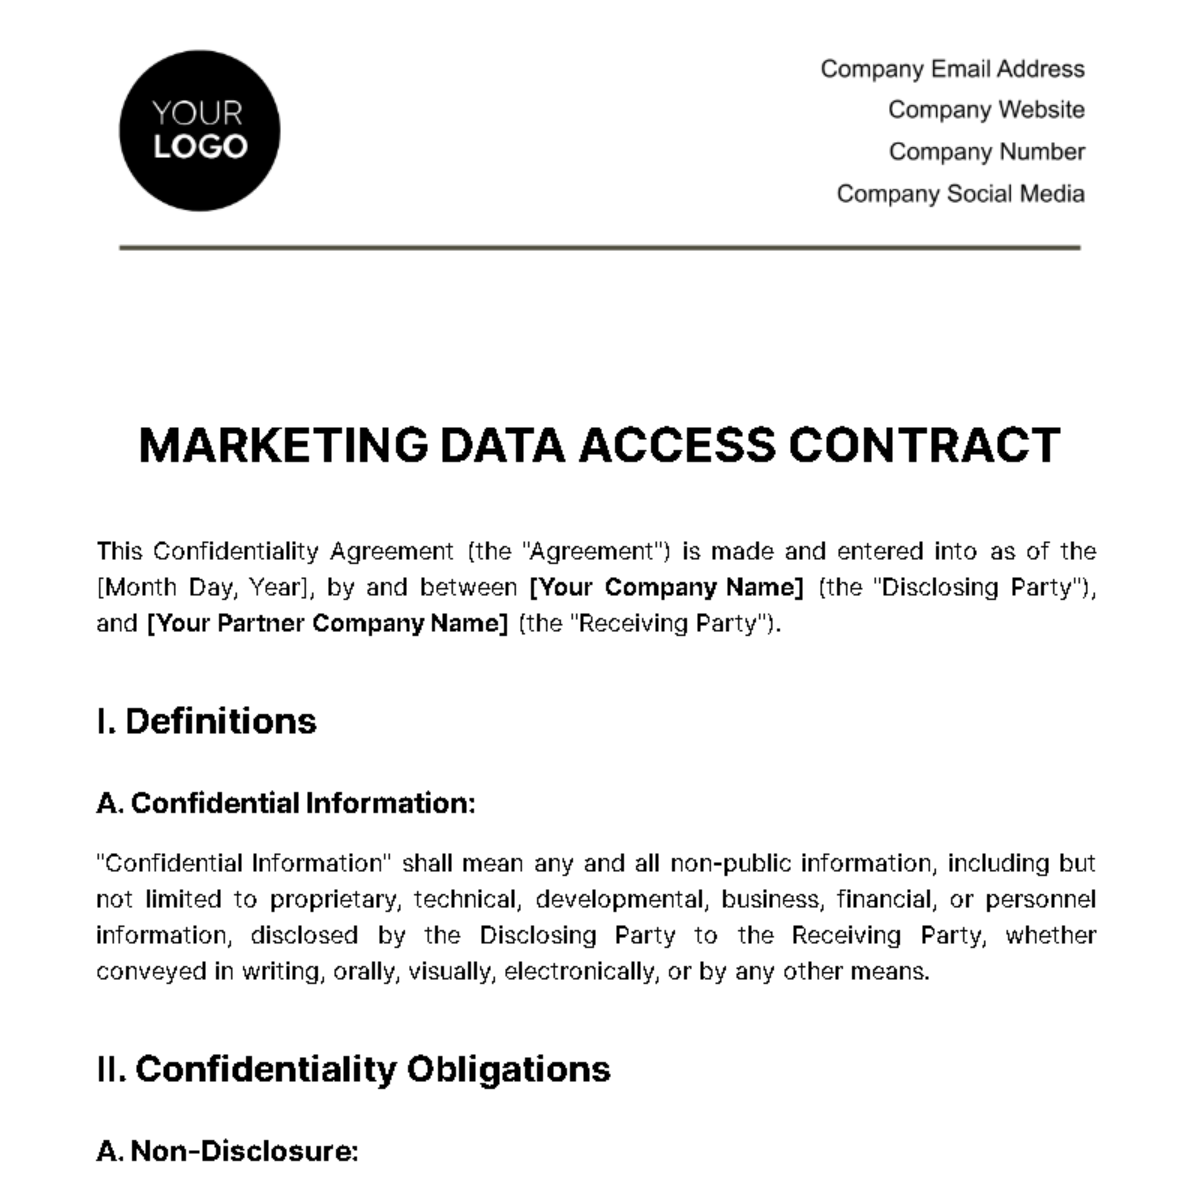 Marketing Data Access Contract Template